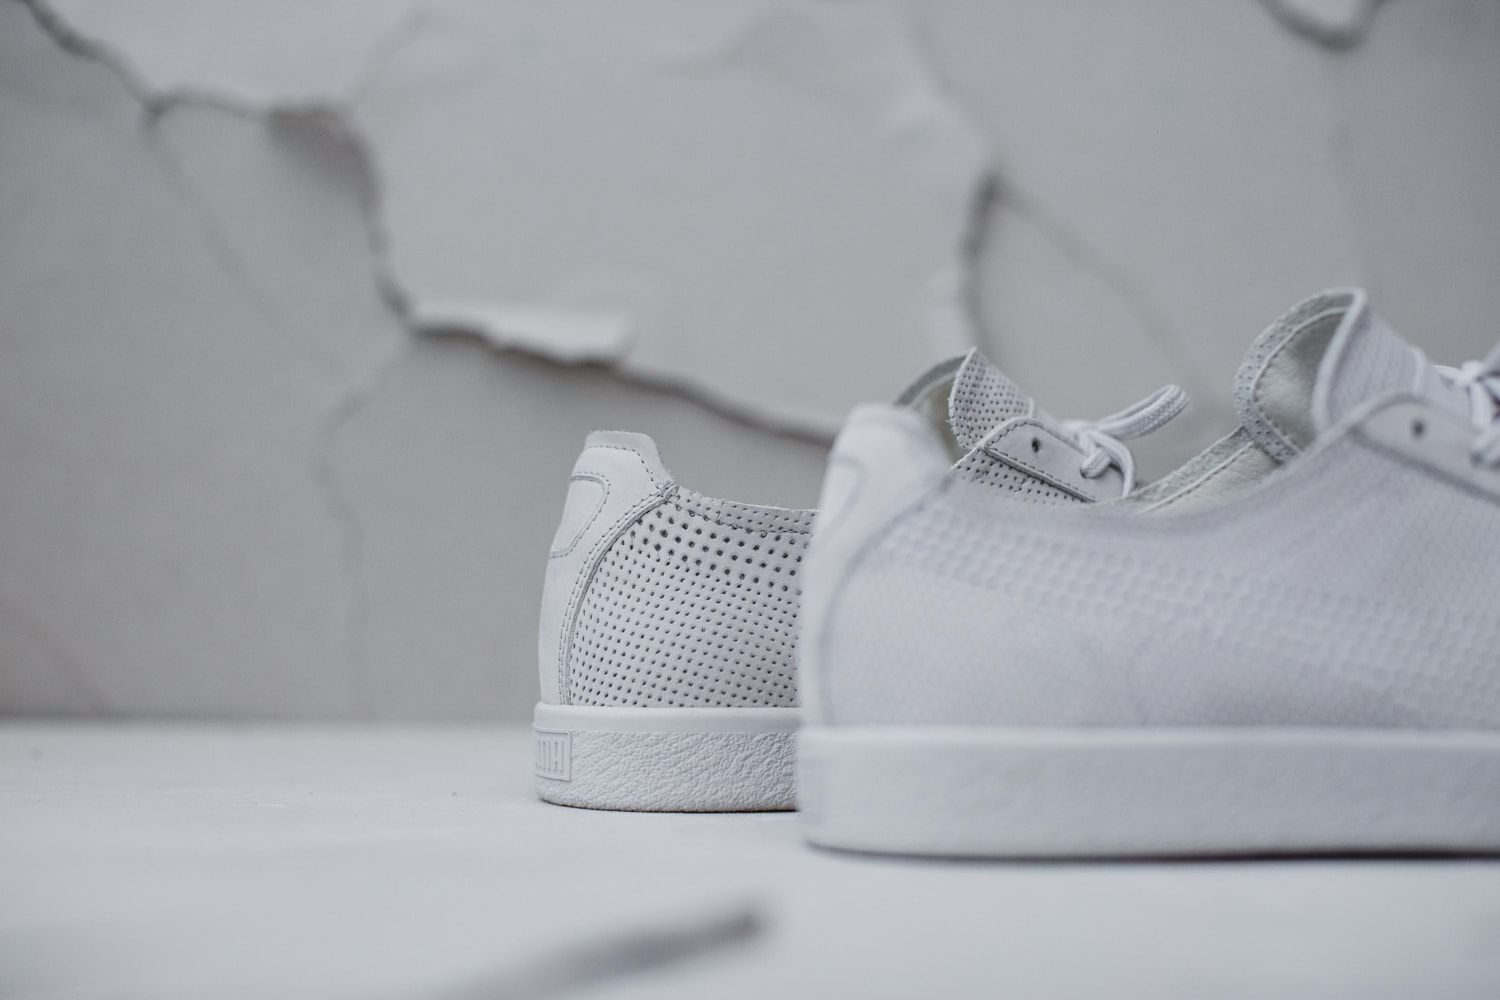 Stampd x PUMA “96 Hours” Collection